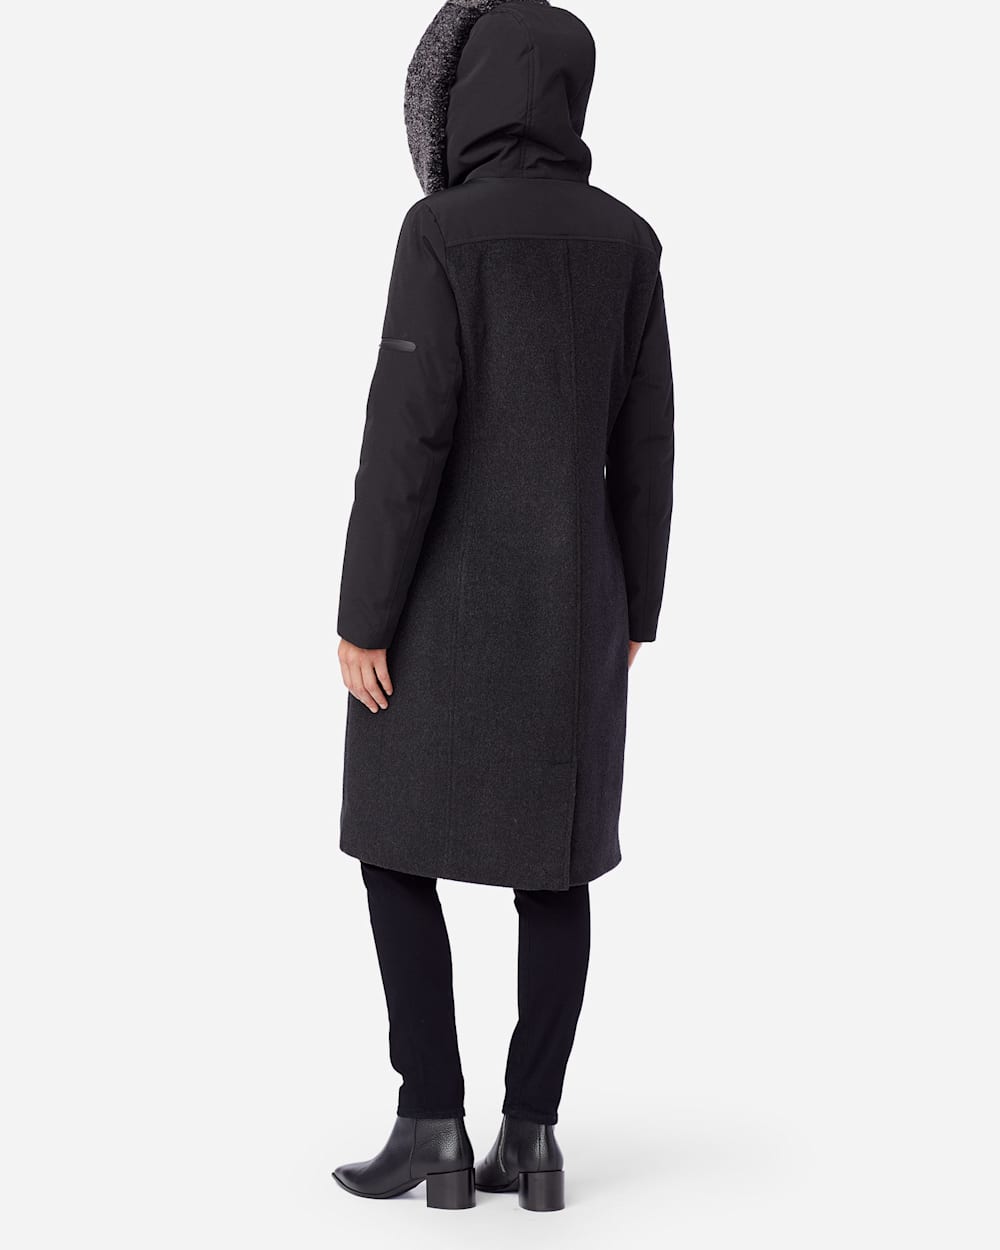 ALTERNATE VIEW OF WOMEN'S ALBANY SHEARLING-HOODED COAT IN CHARCOAL/BLACK image number 3